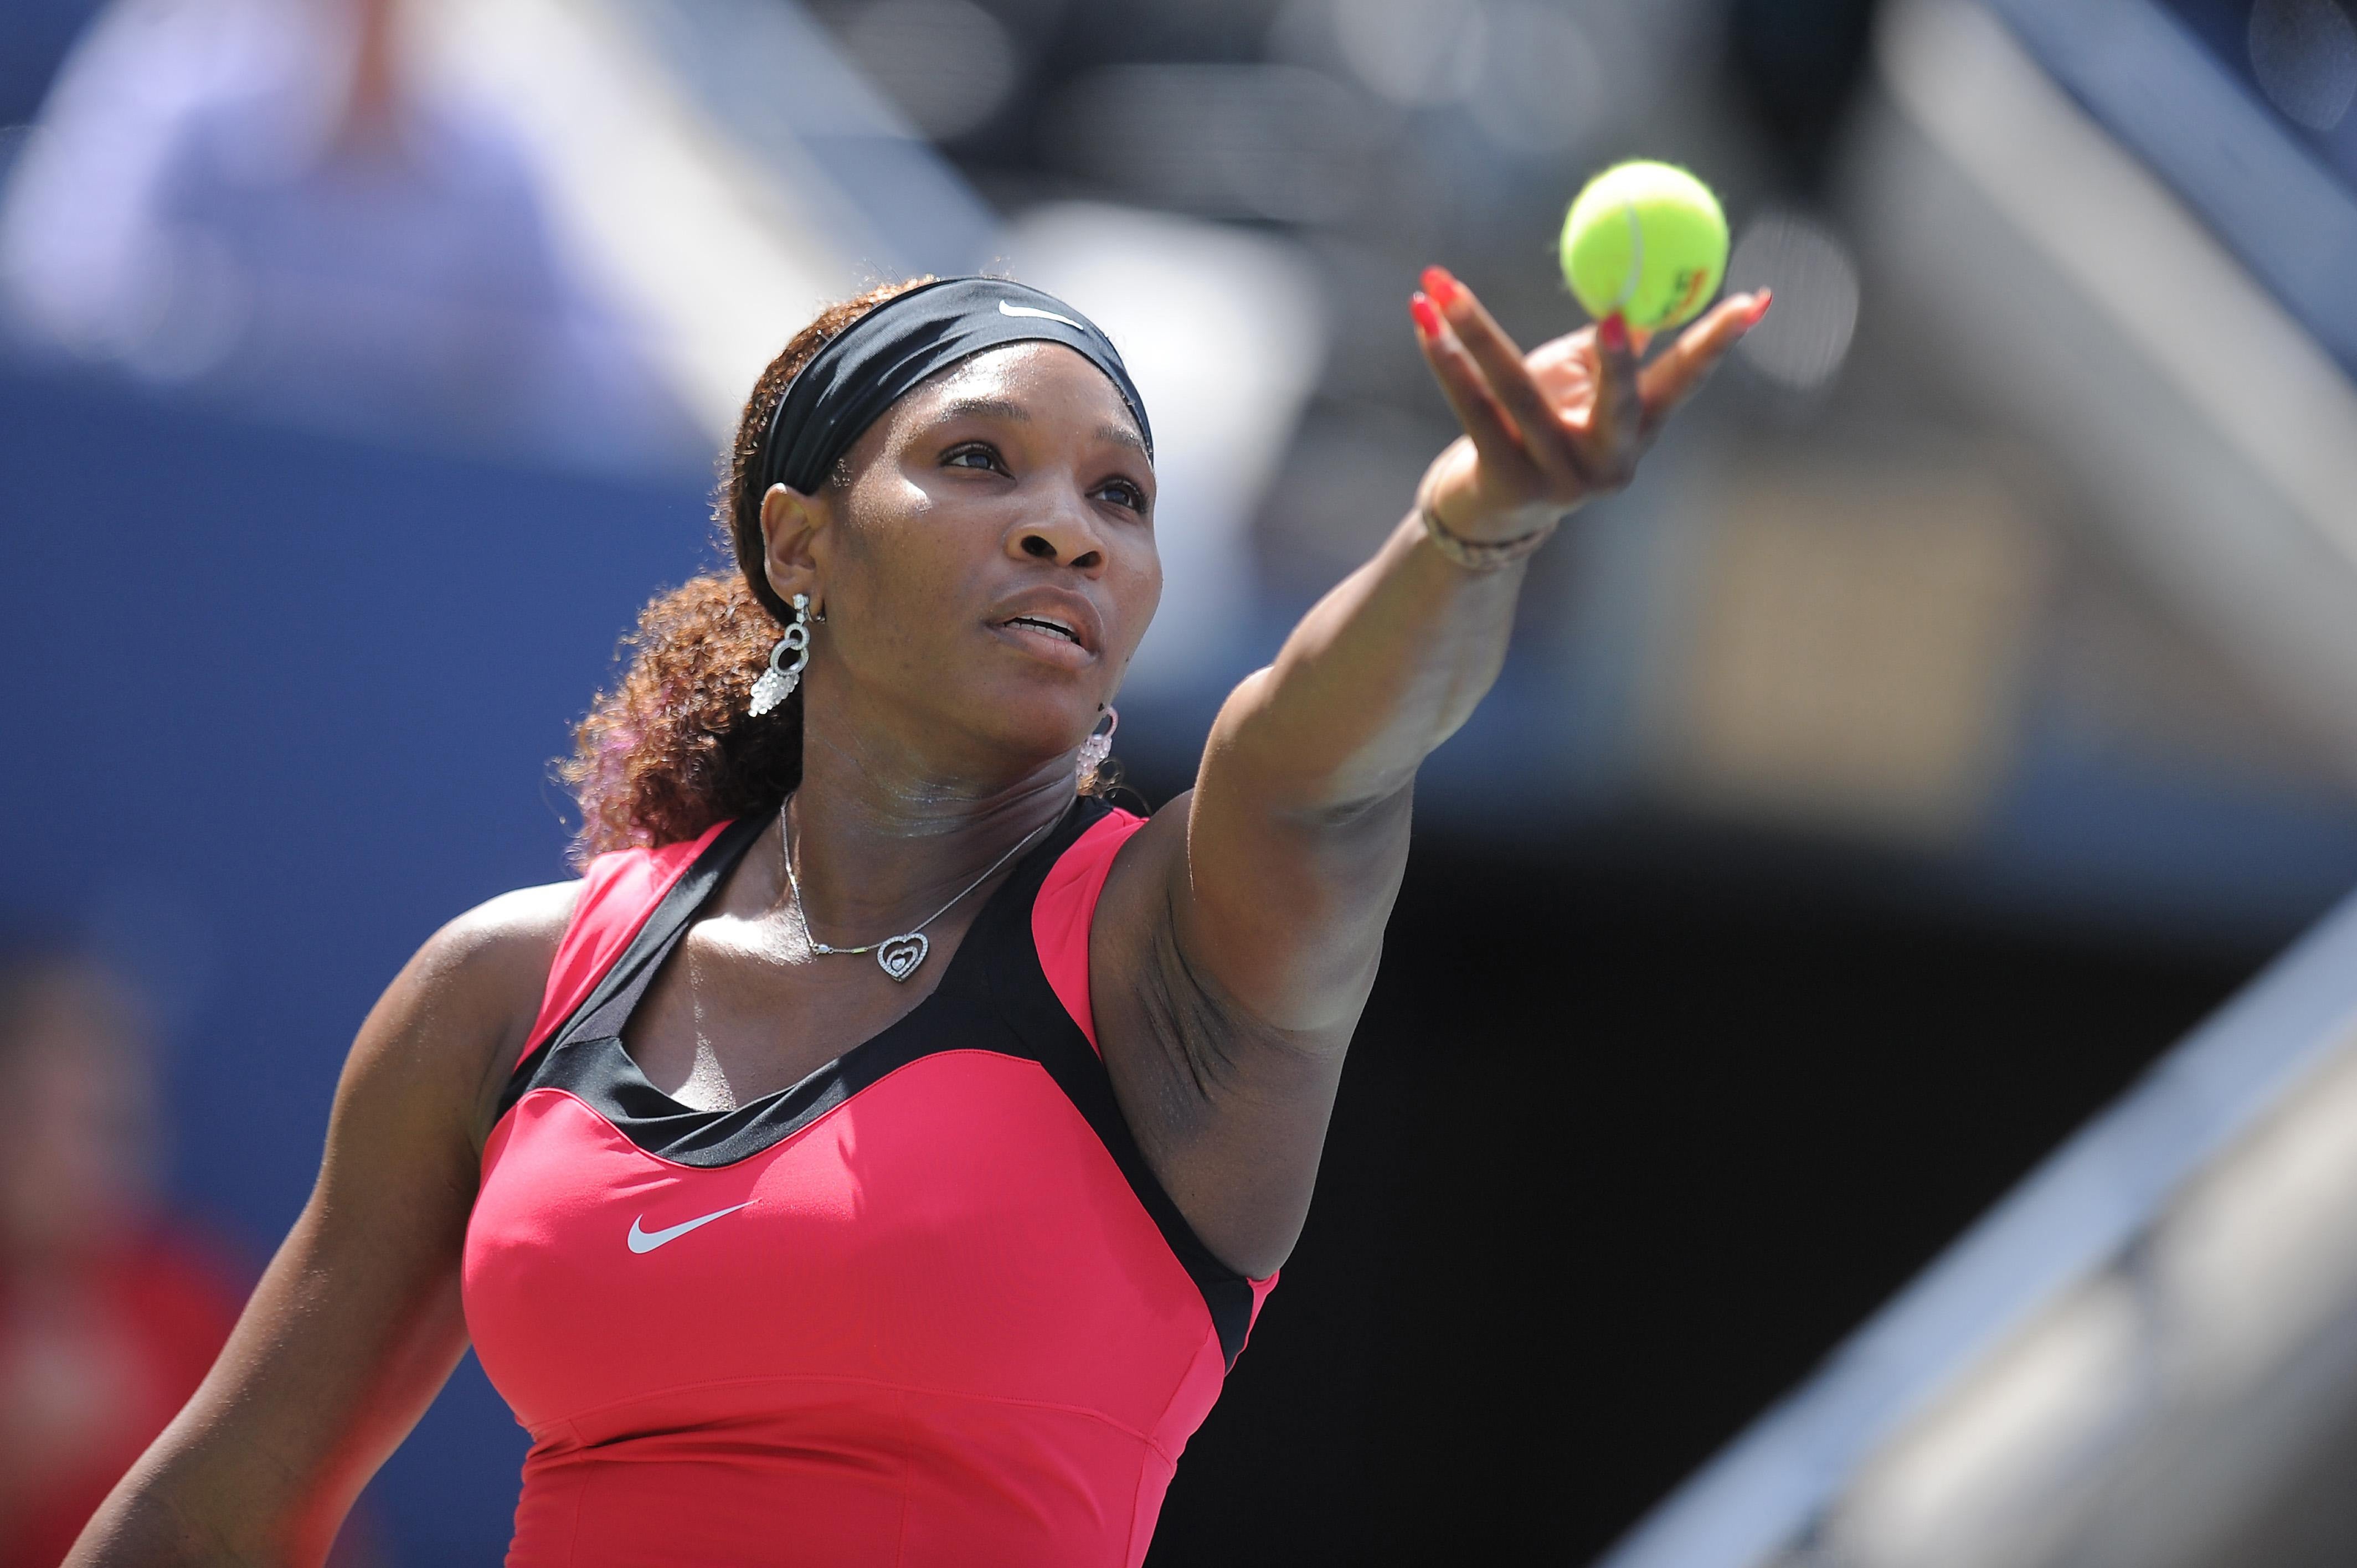 Serena Williams is set to walk away from tennis after the US Open (Mehdi Taamallah/PA)